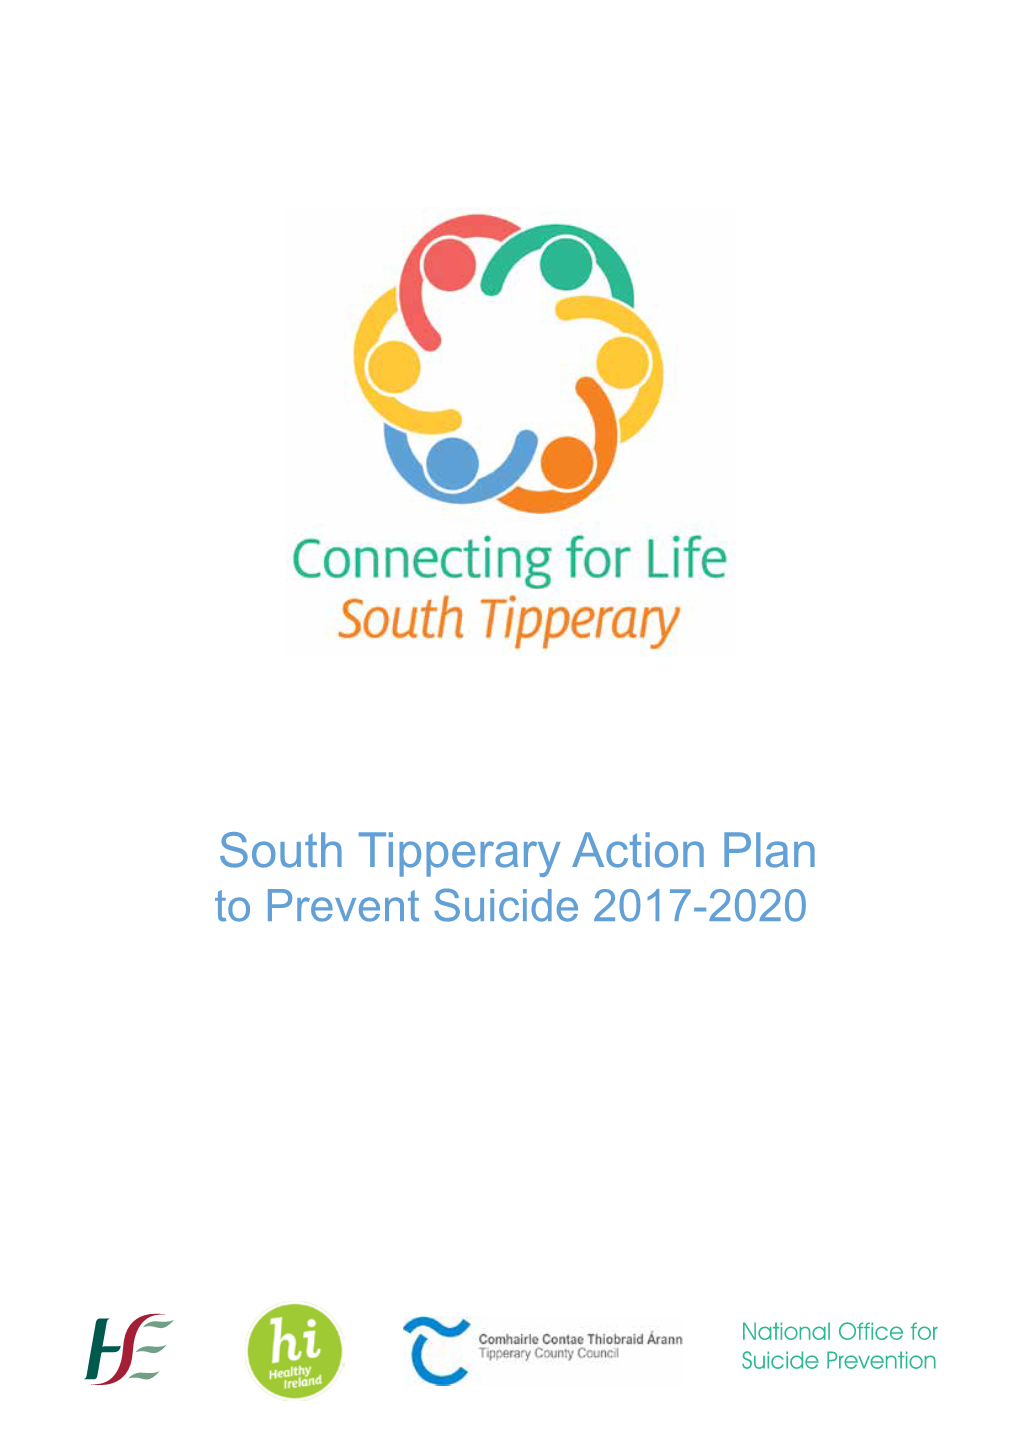 South Tipperary Action Plan to Prevent Suicide 2017-2020